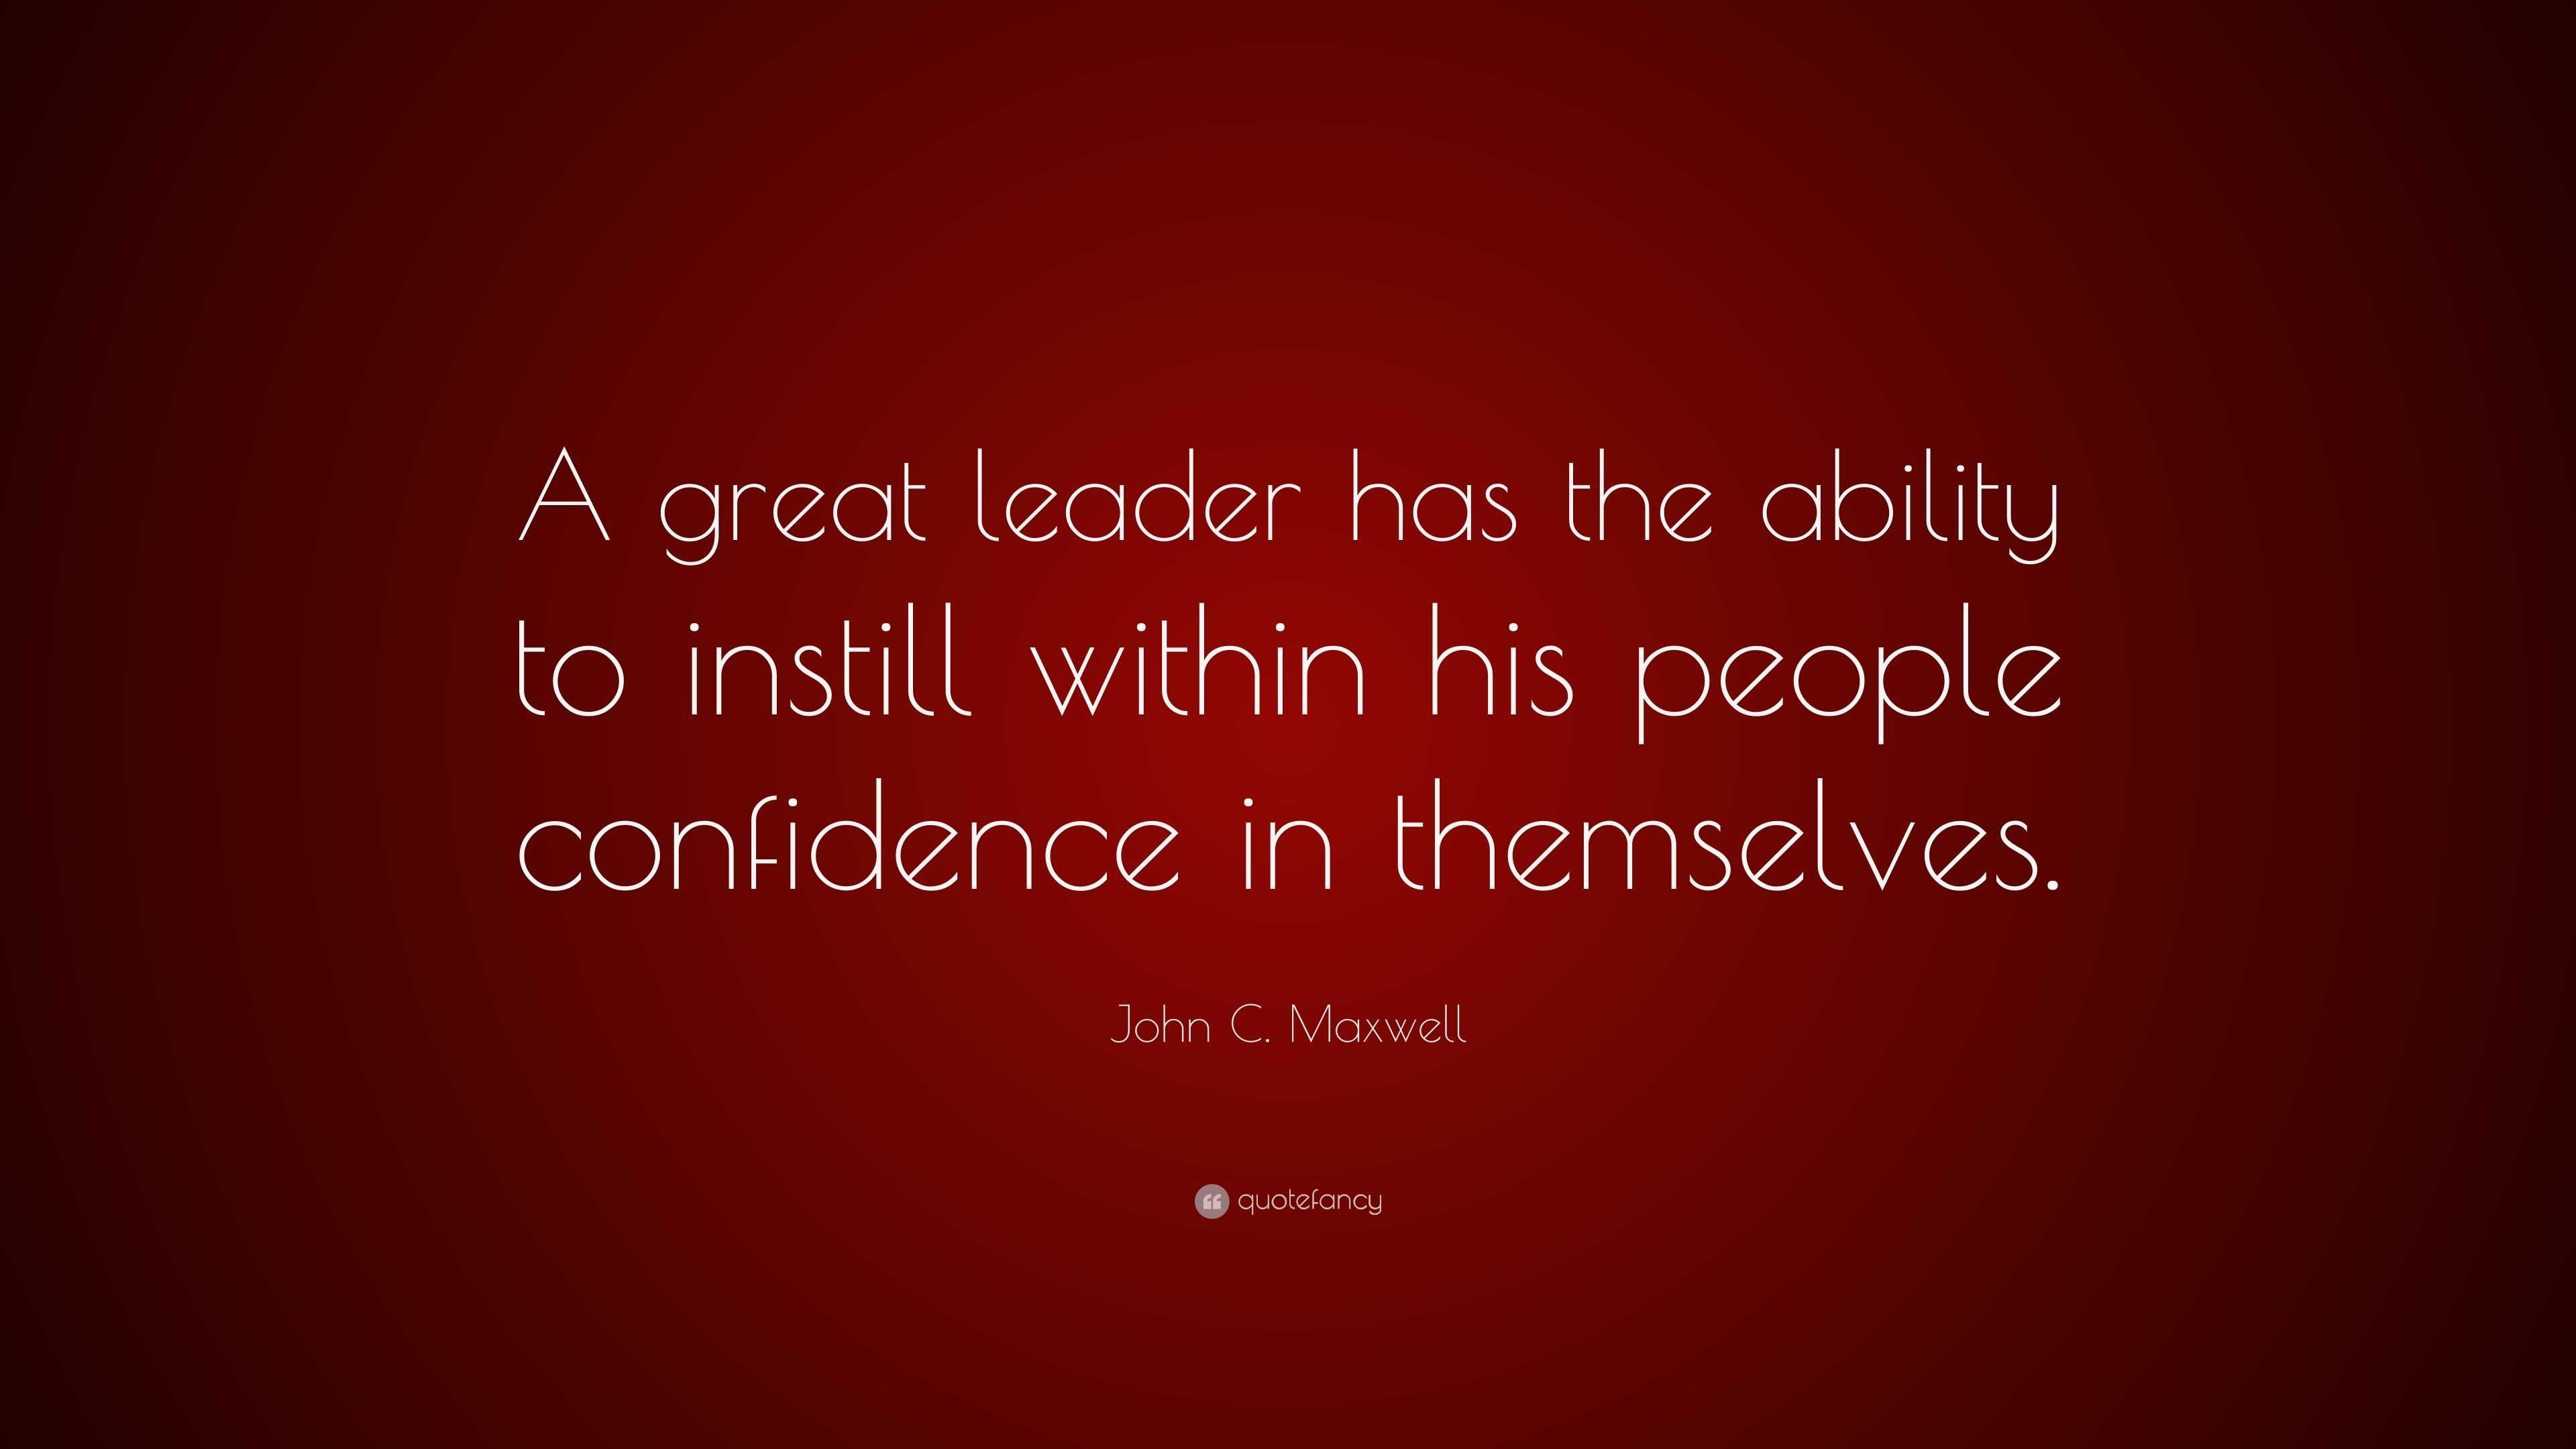 John C. Maxwell Quote: “A great leader has the ability to instill ...